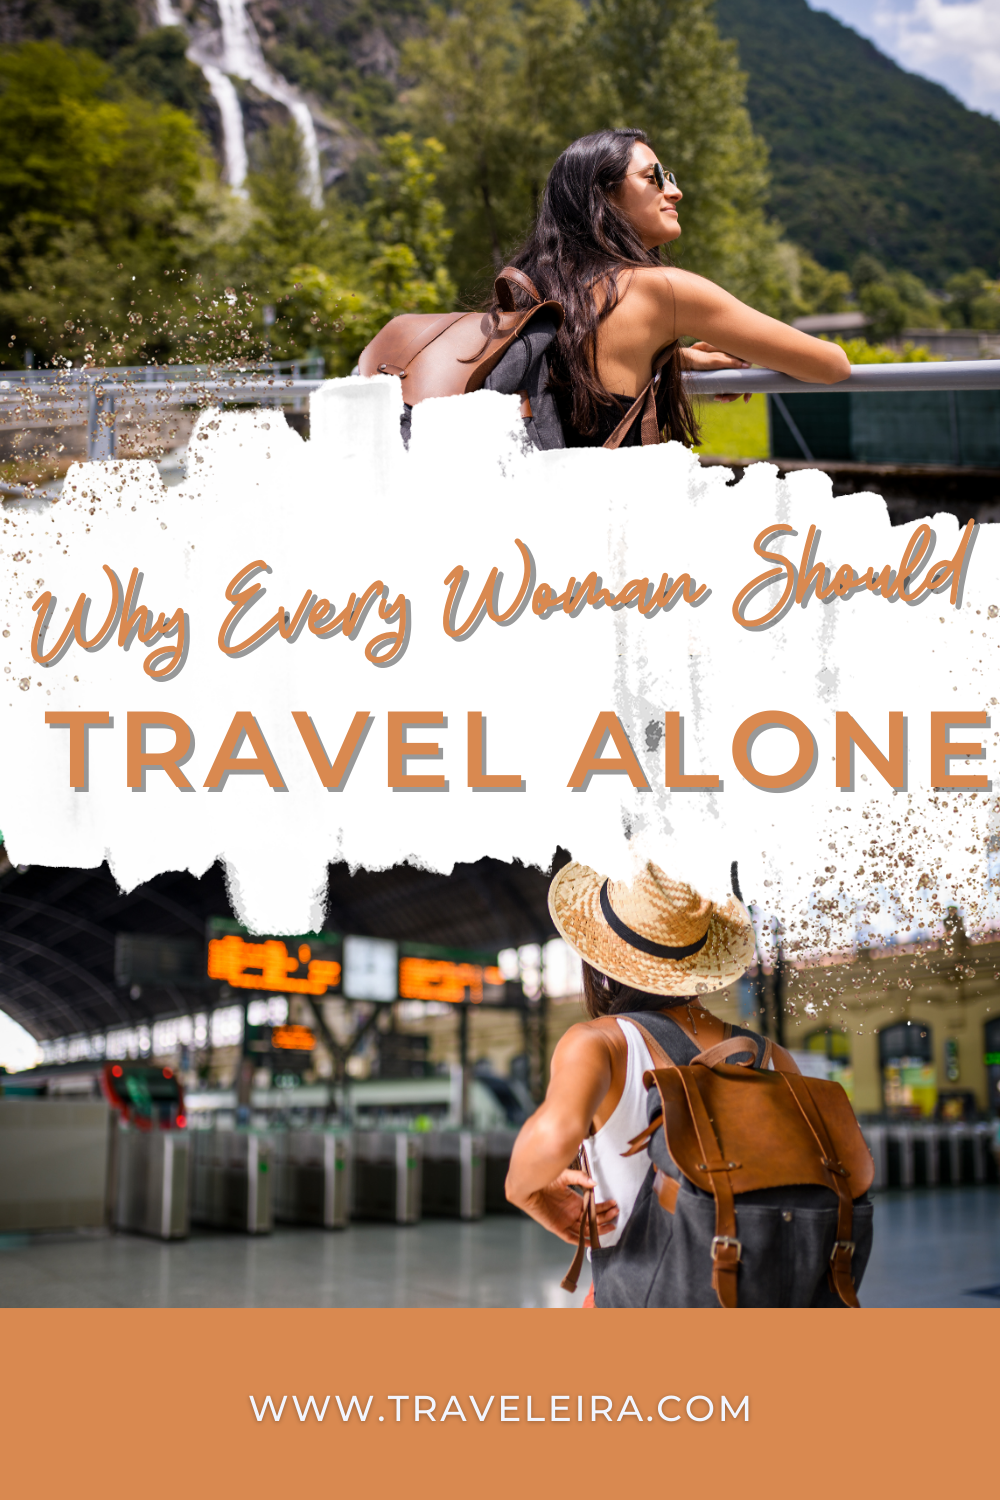 Let's explore the pros and cons of traveling solo while answering why every woman should travel alone at least once.